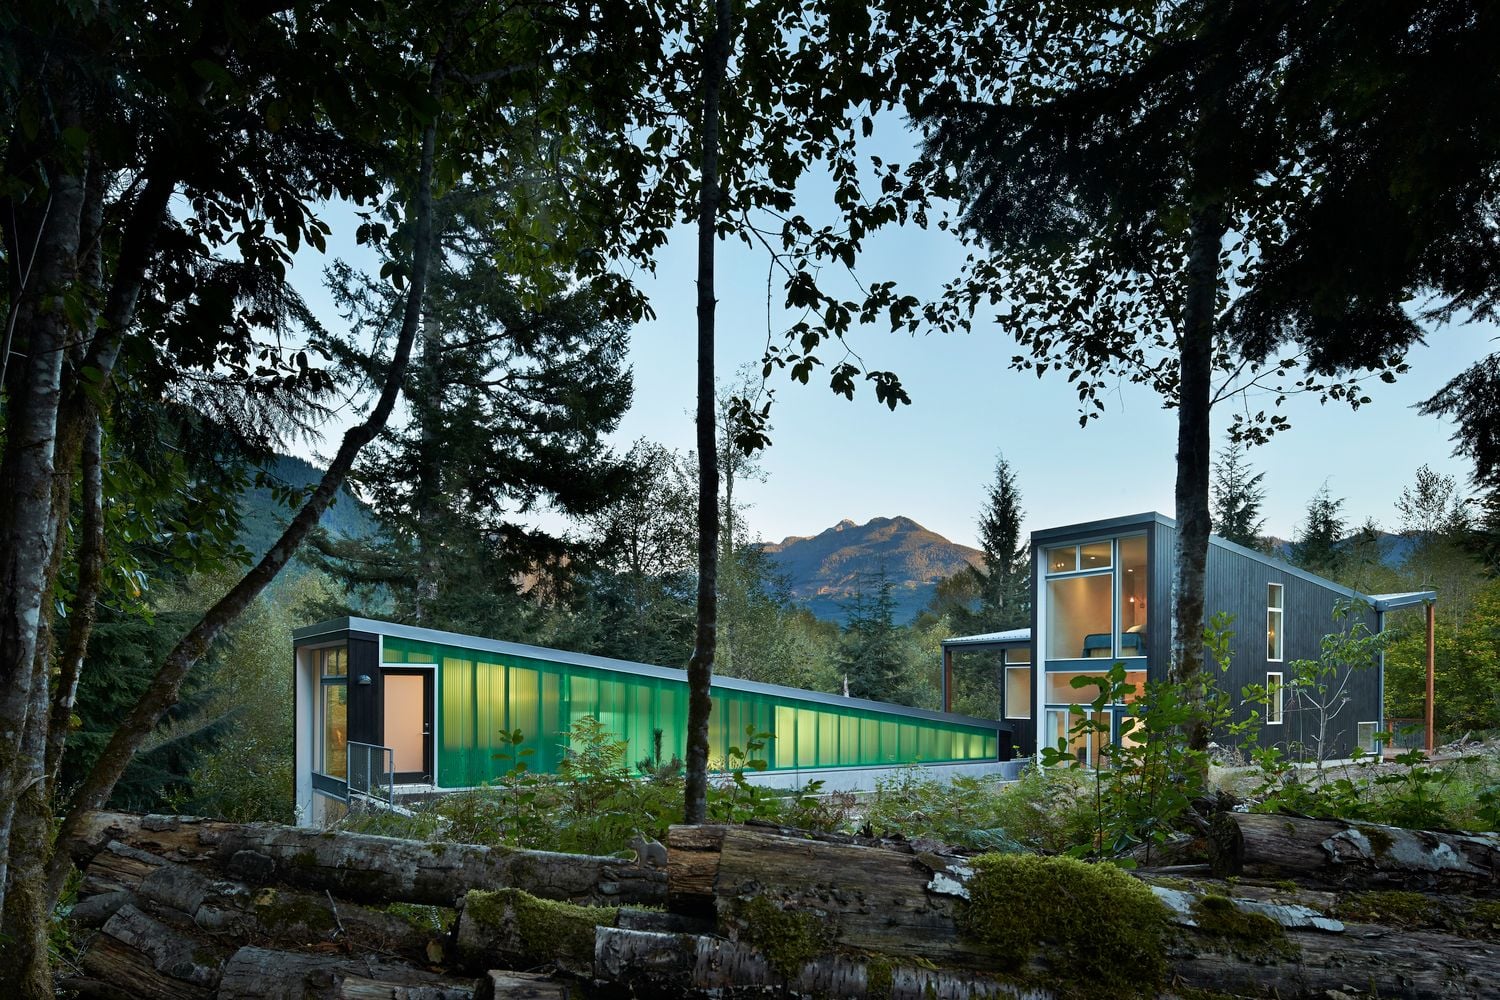 Northern Washington's Bear Run Cabin is a lot more modern than your average log structure.